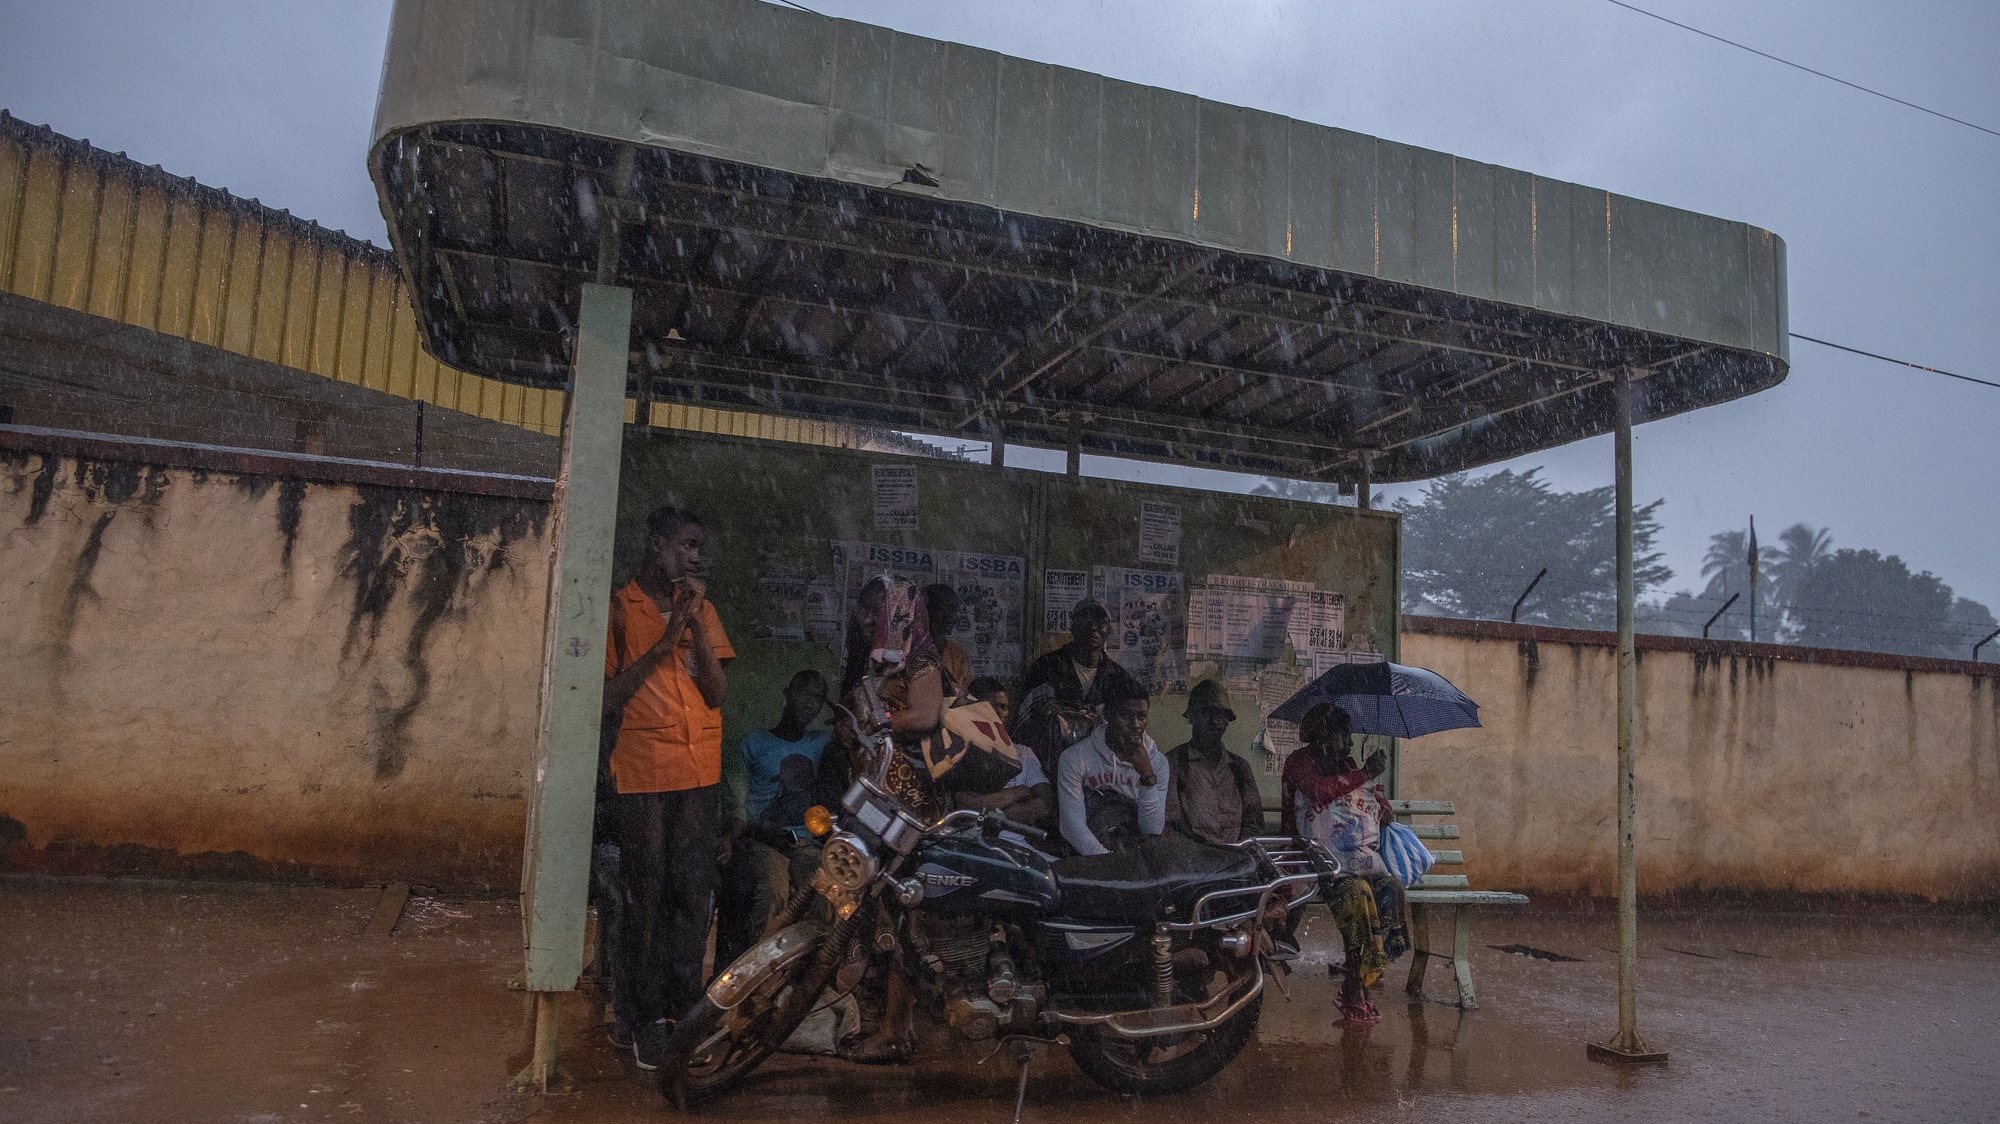 epa07069966 Commuters shelter from a tropical rain storm in the capital Yaounde, Cameroon, 04 October 2018. Cameroon holds presidential elections on 07 October 2018 with incumbent president Paul Biya who has been in power since 1982 looking for a seventh term in office.  EPA/NIC BOTHMA